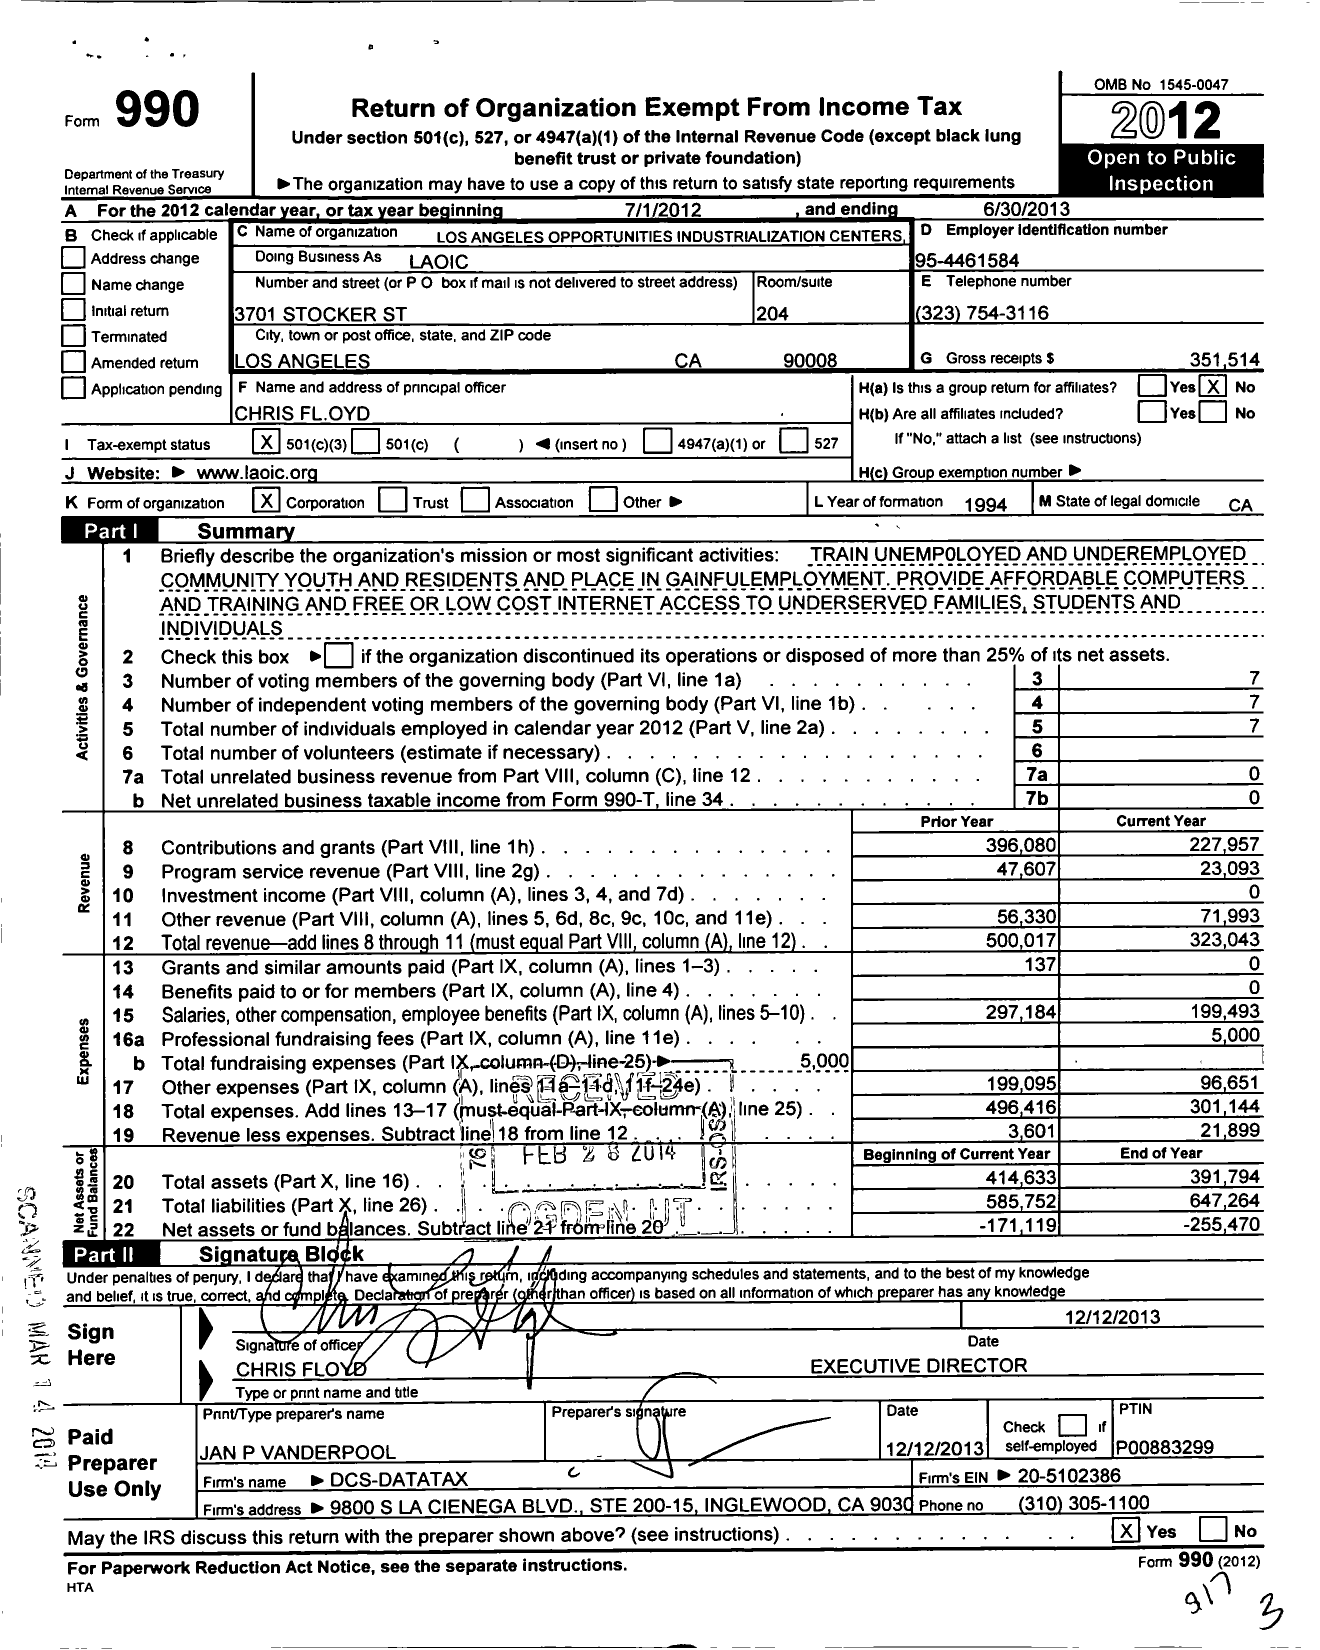 Image of first page of 2012 Form 990 for Los Angeles Opportunities Industrialization Centers (LAOIC)